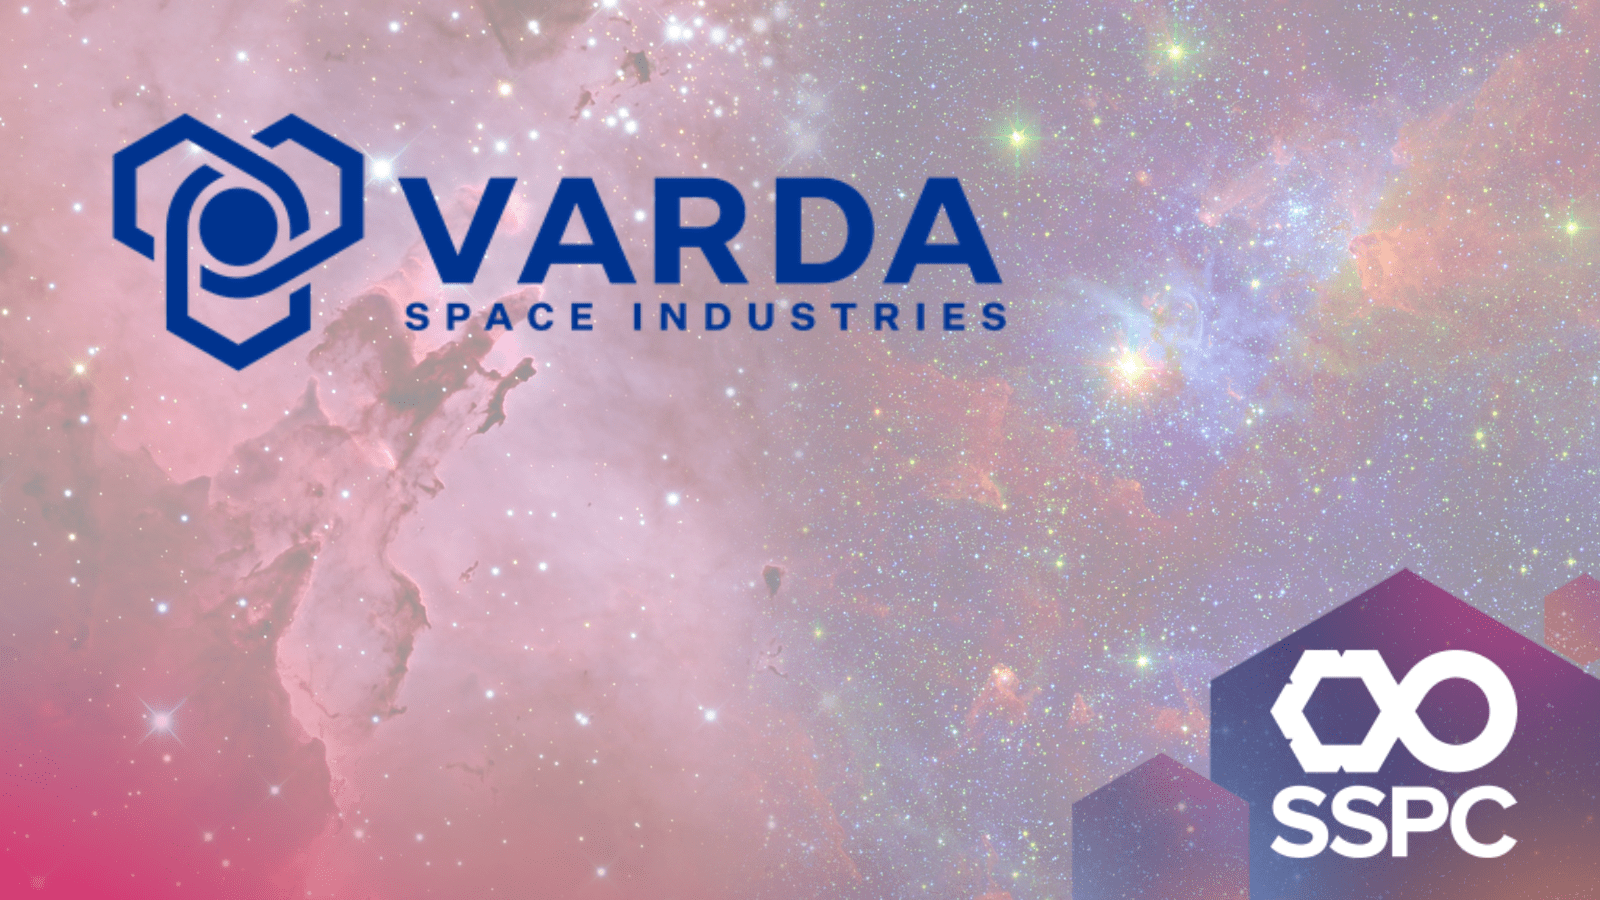 New partnership announced between SSPC and Varda Space Industries